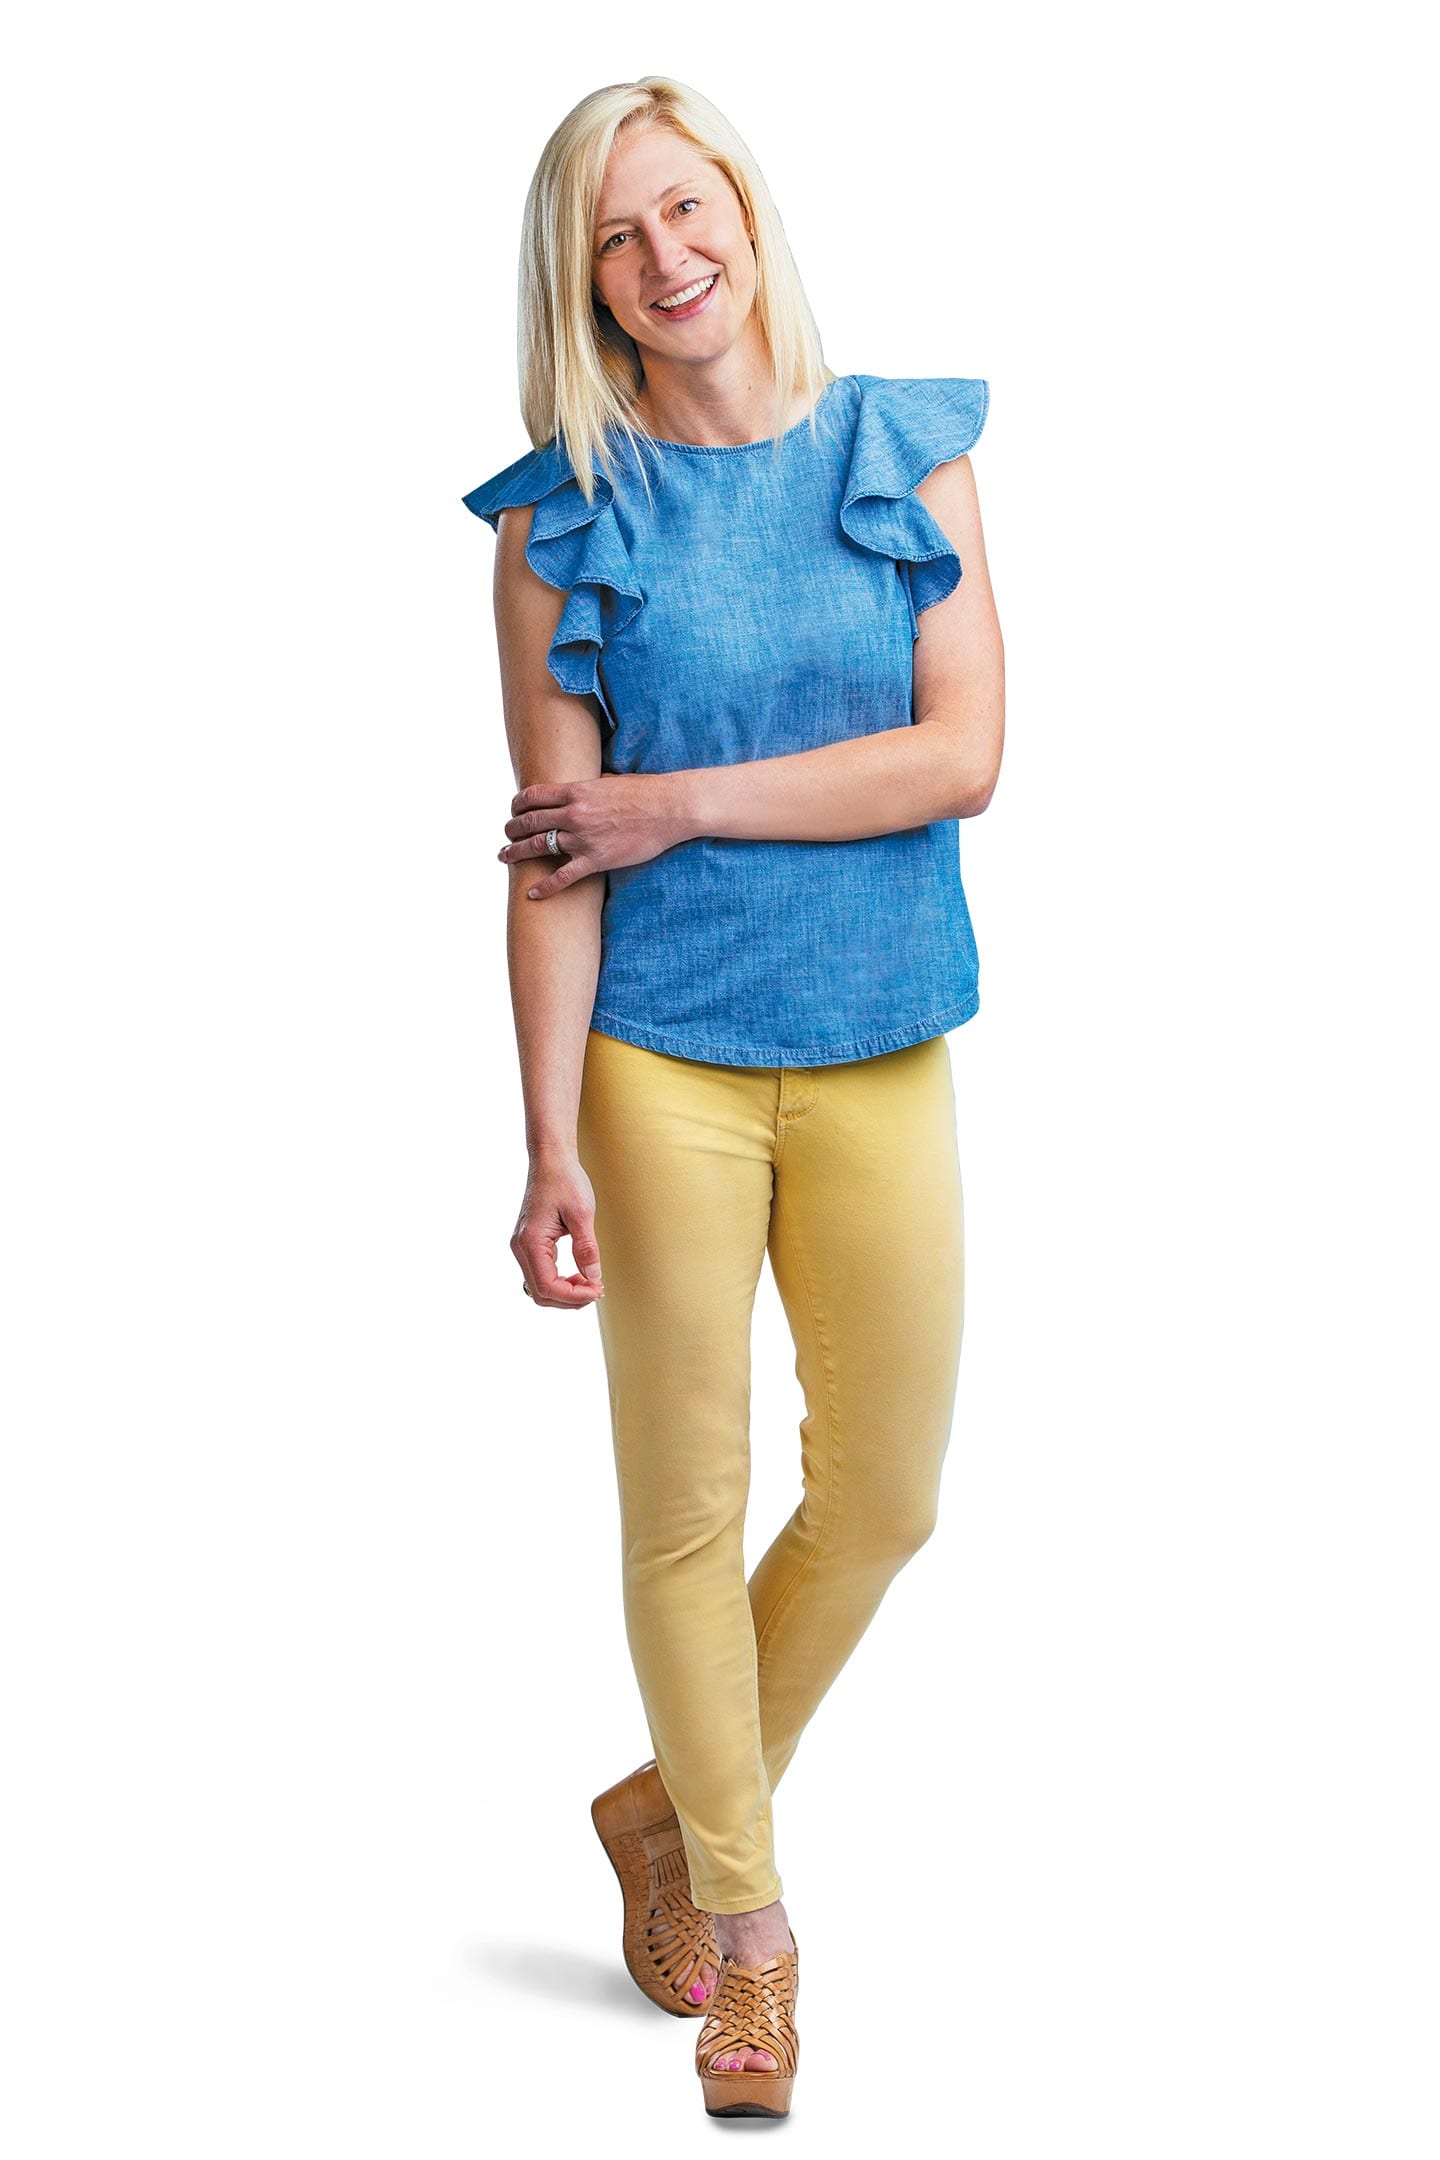 Amy Jo Osborn HealthScope Summer 2019 cover model standing wearing blue blouse and yellow pants in chattanooga